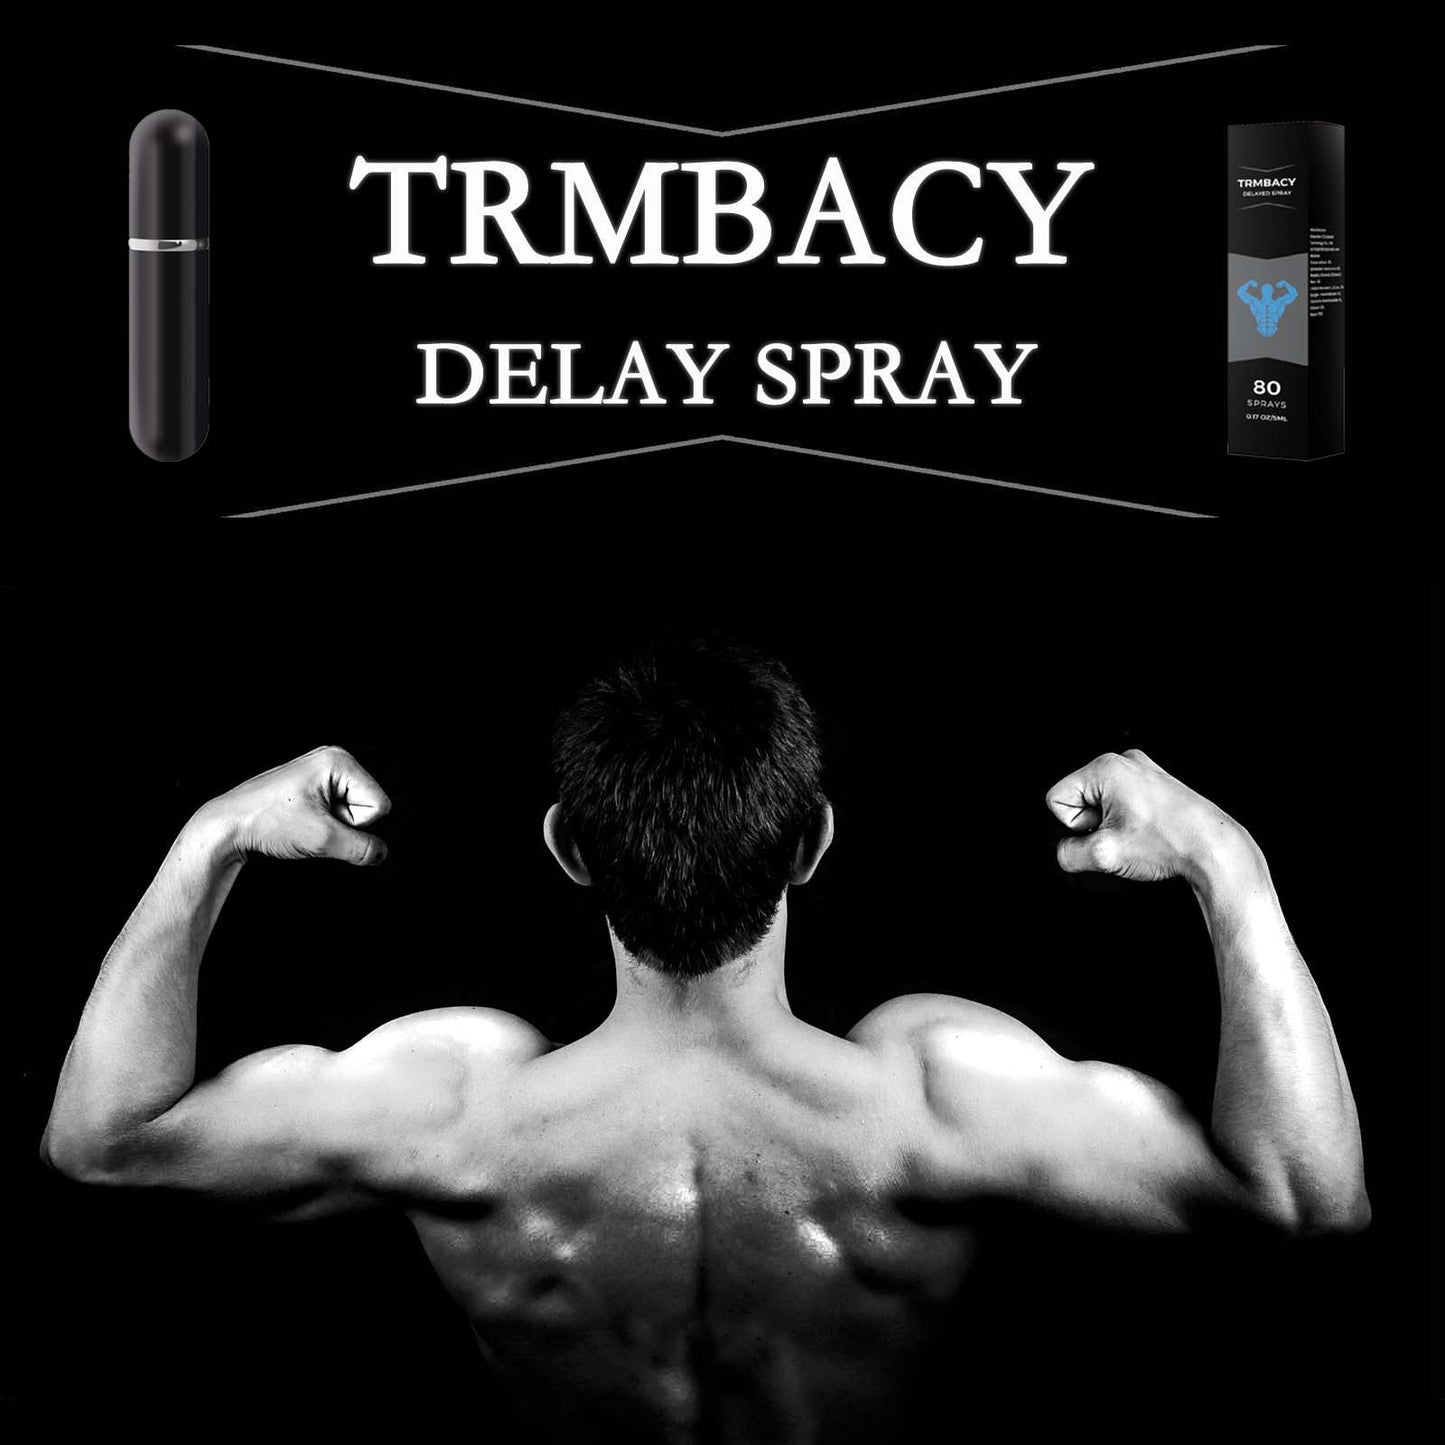 XSSpray Men's Desensitization Delay Spray, Clinically Proven to Help You Last Longer in Bed - Extended Men's Orgasm, 5ml （1pcs）